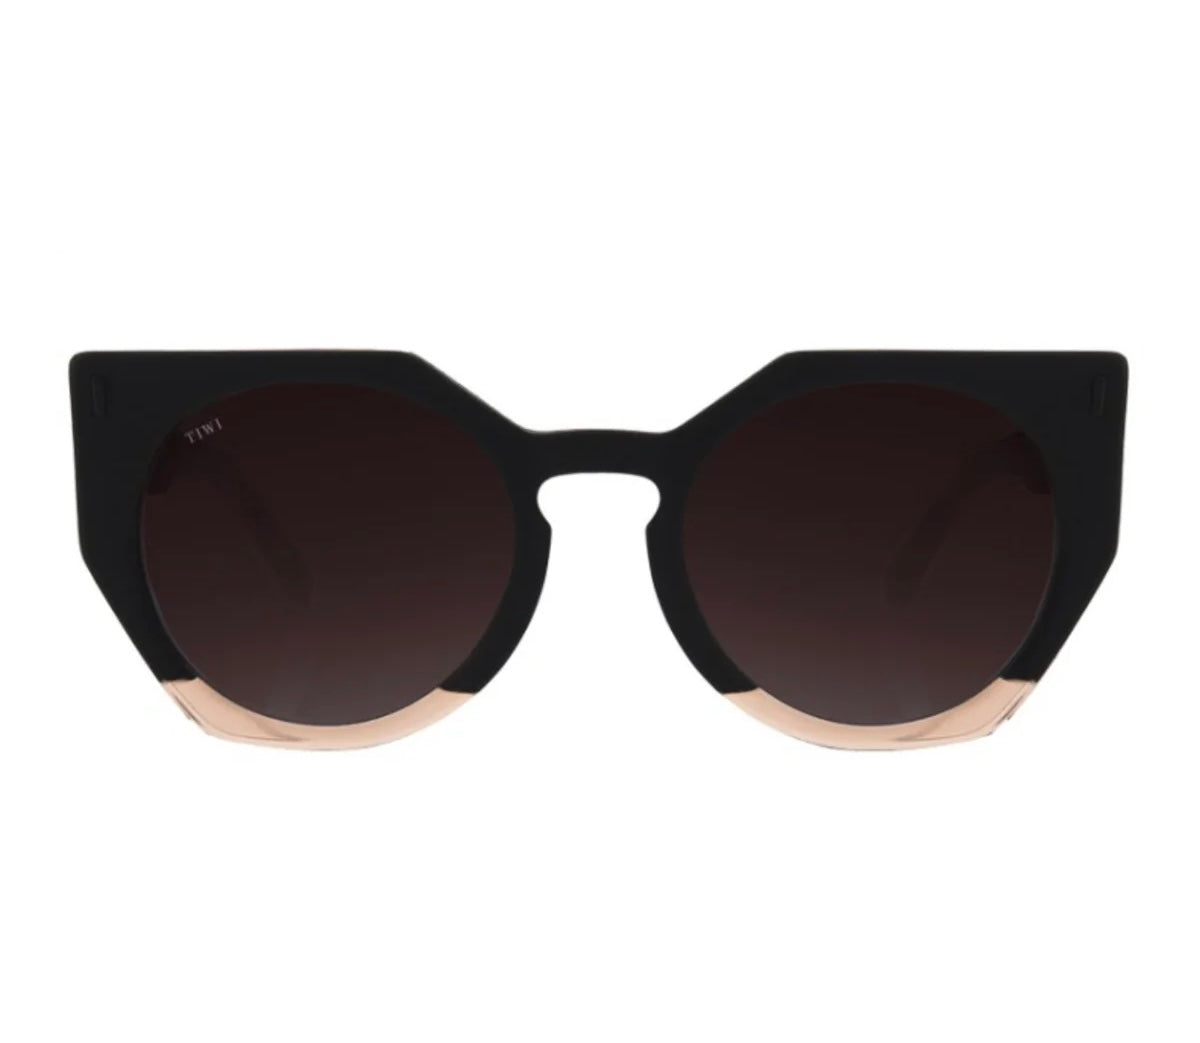 VENUS Sunglasses Available in more colors Rubber Black/Shiny Pink  